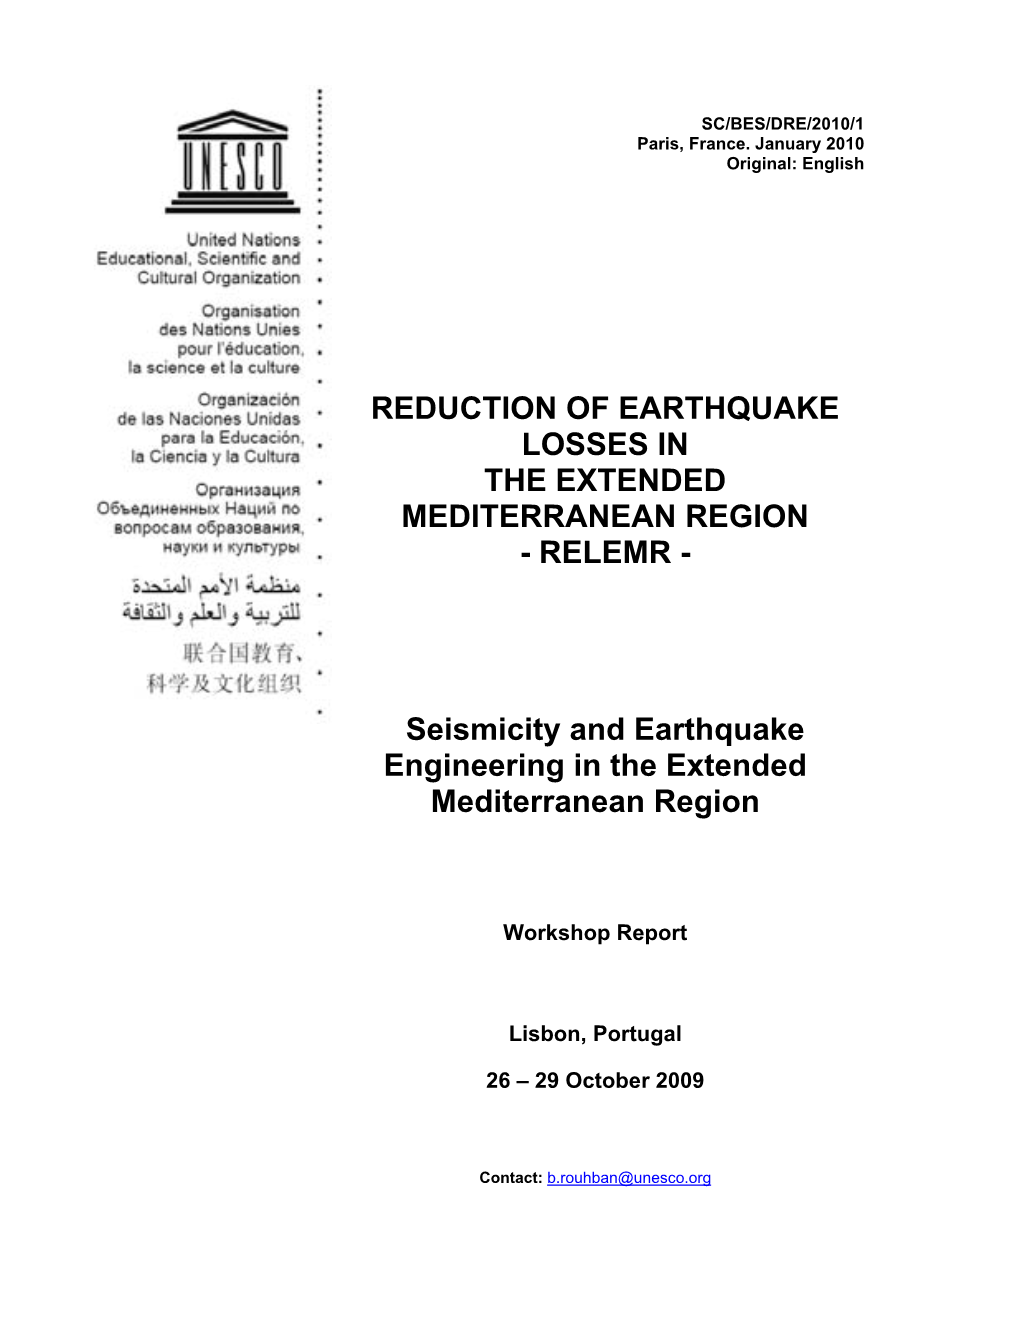 Seismicity and Earthquake Engineering in the Extended Mediterranean Region